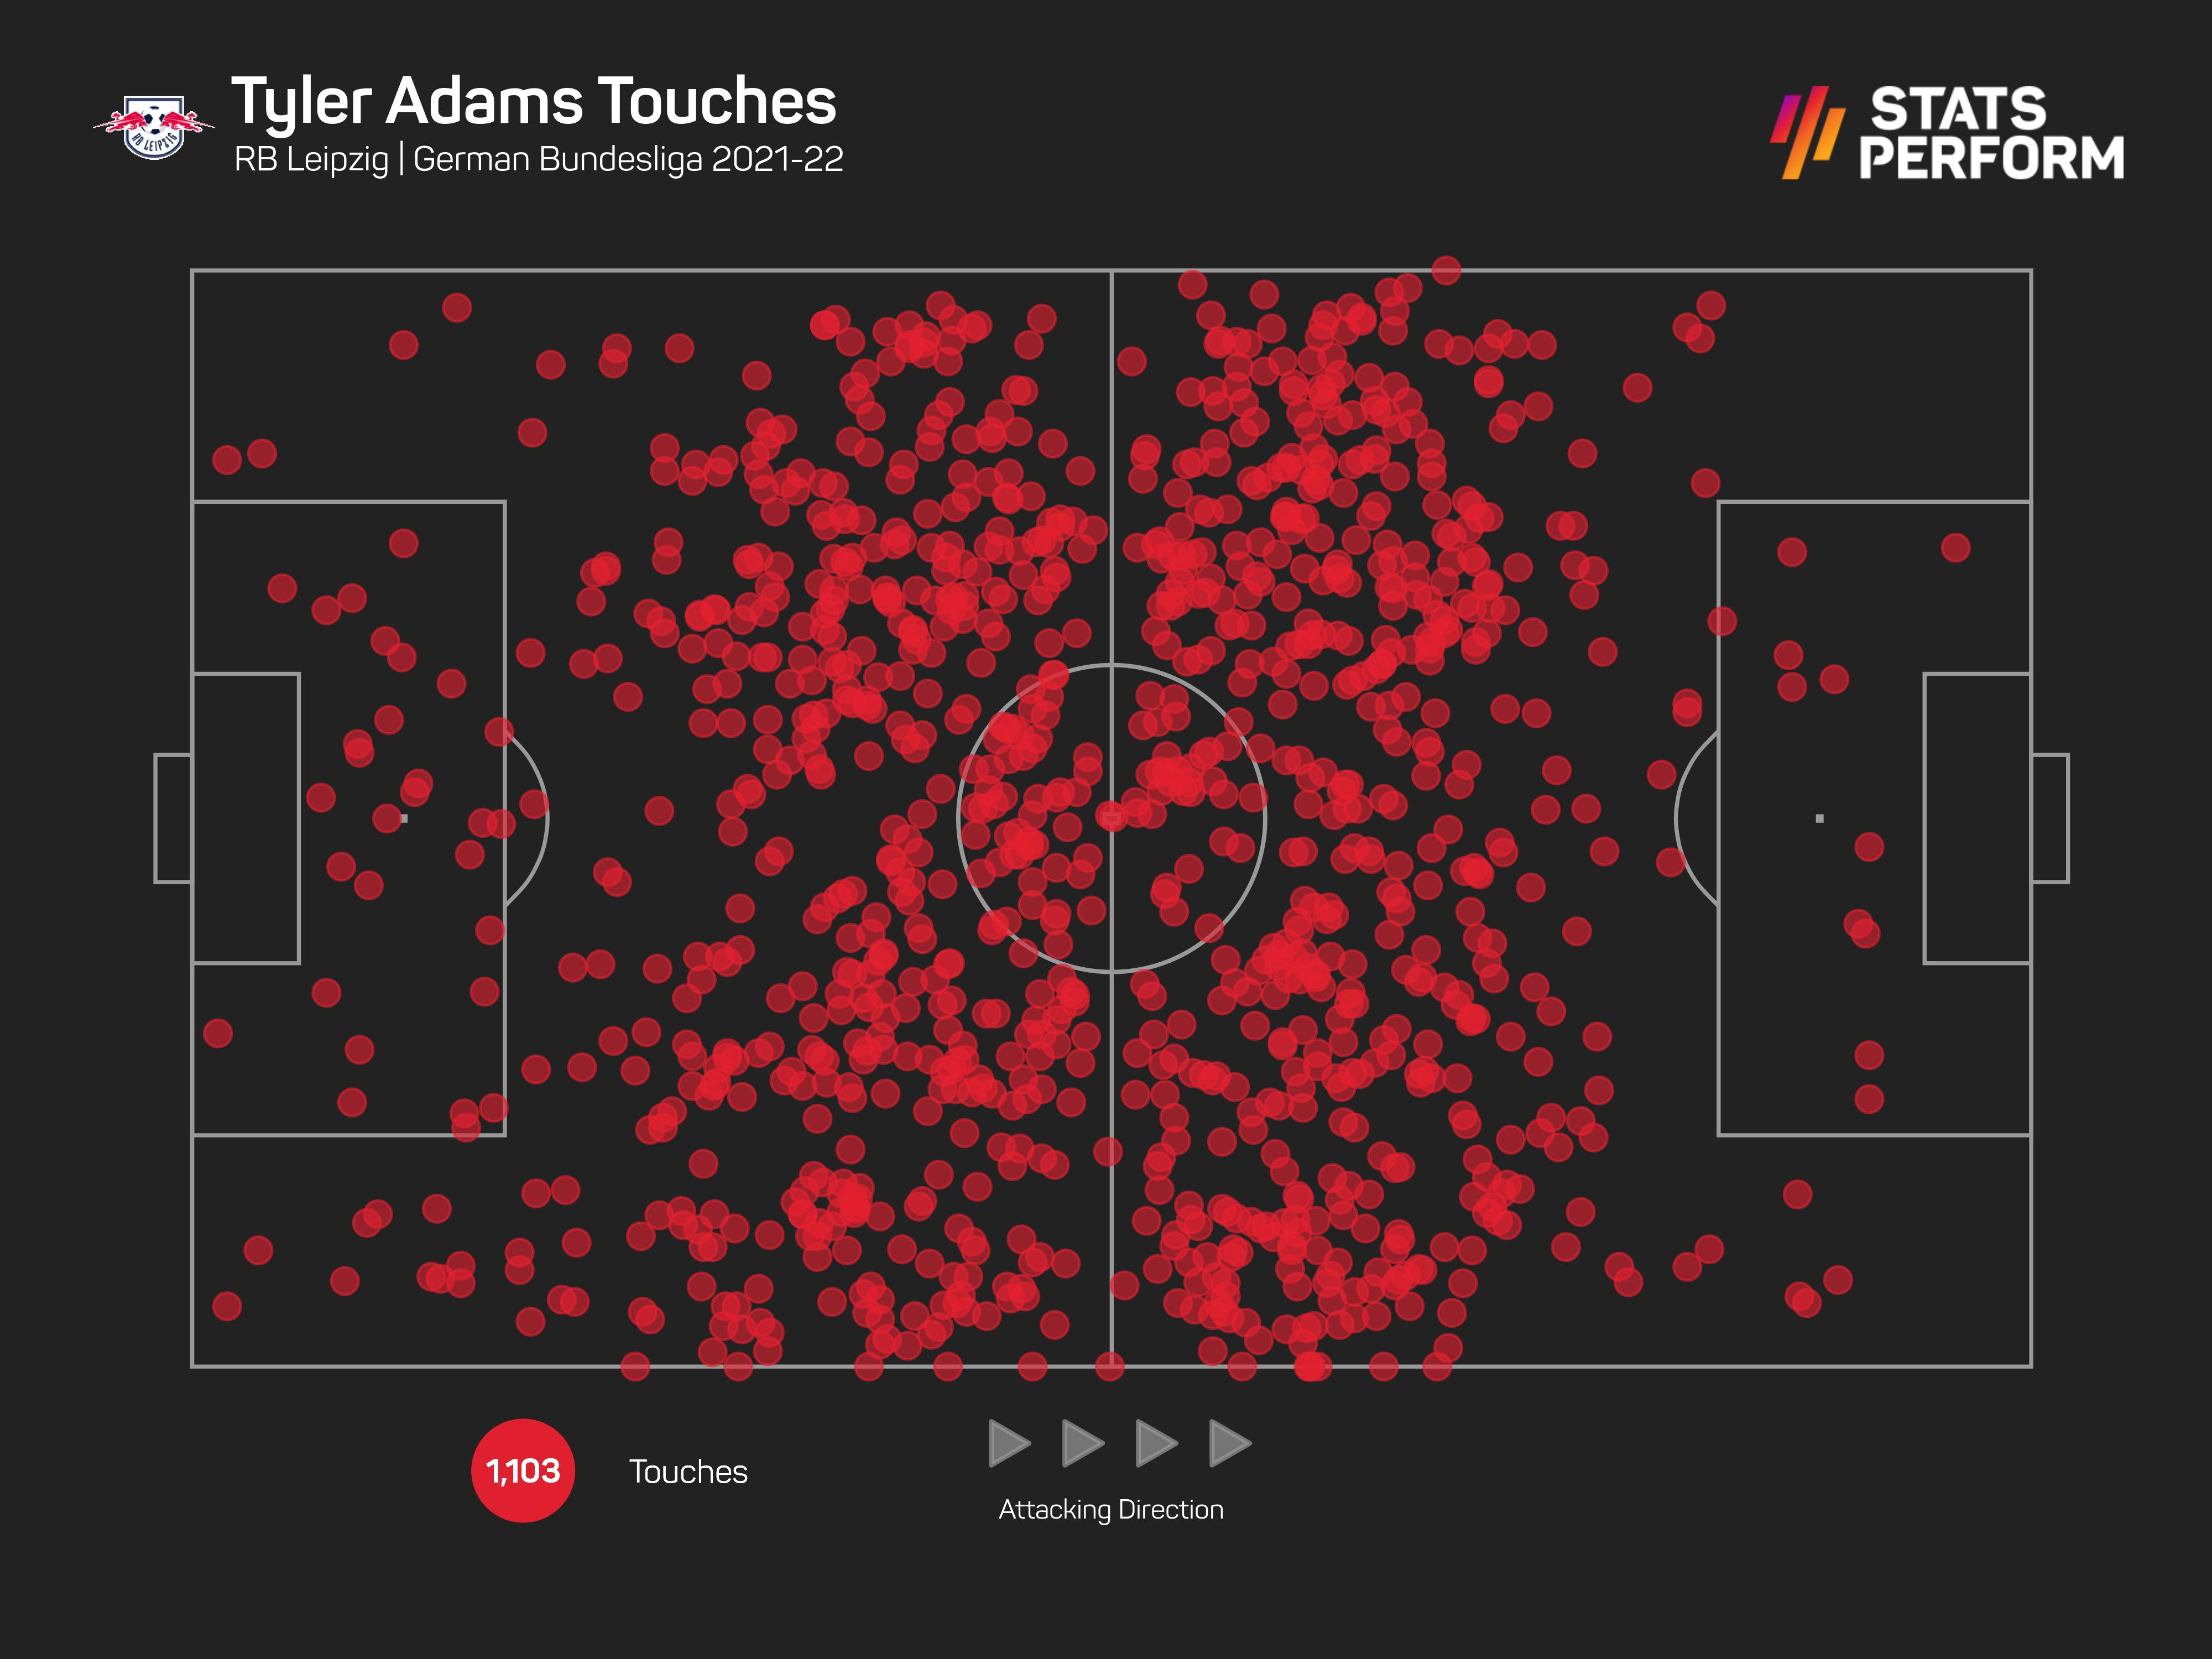 Tyler Adams' touch map in his final season with RB Leipzig